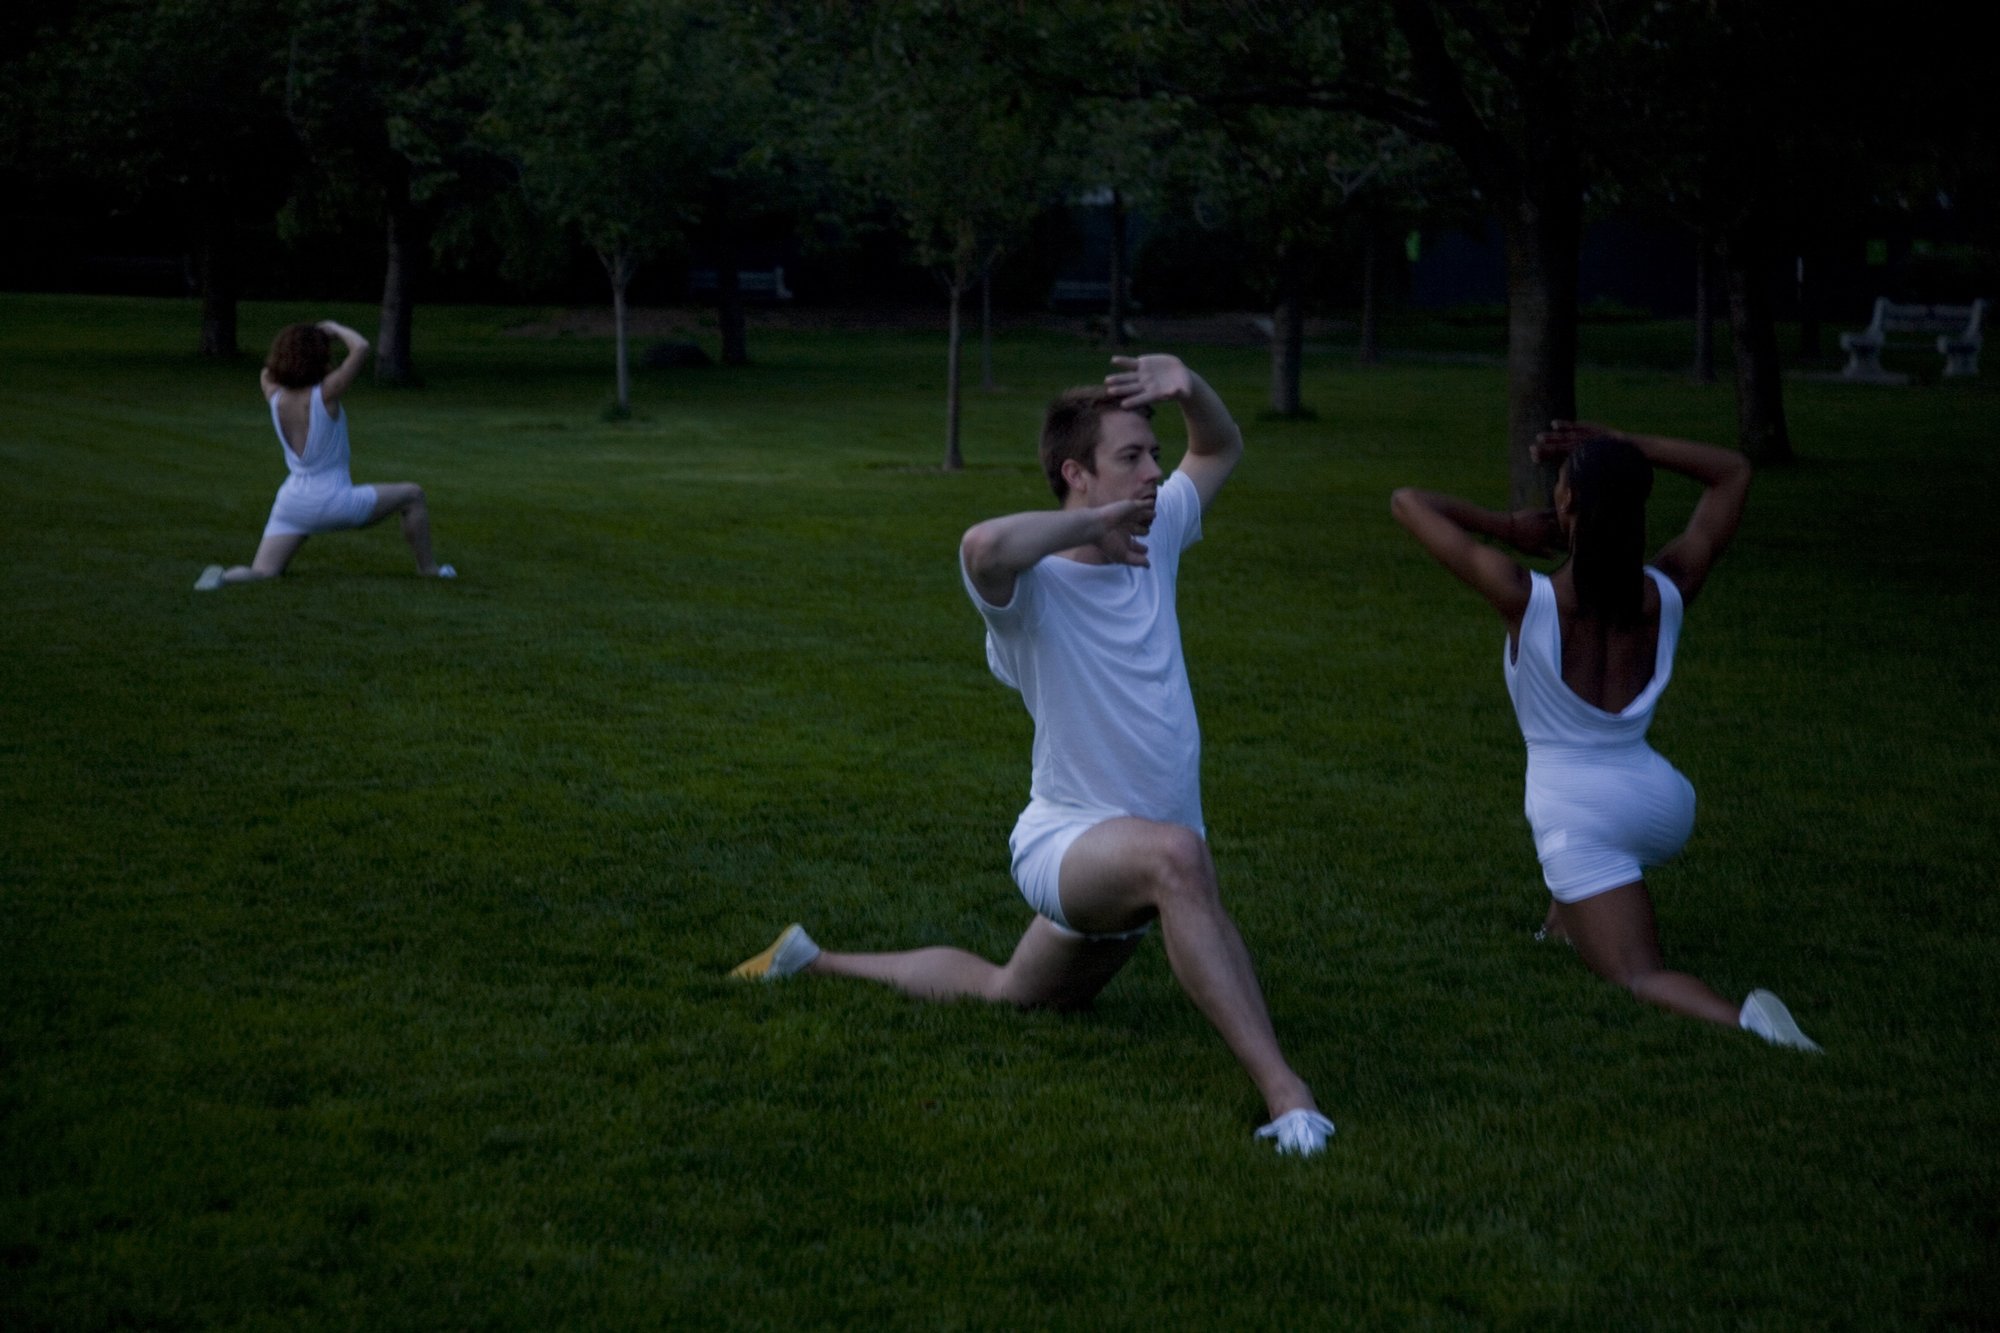 Performers in white kneeling in a green field. Photo by Kevin Kwan.